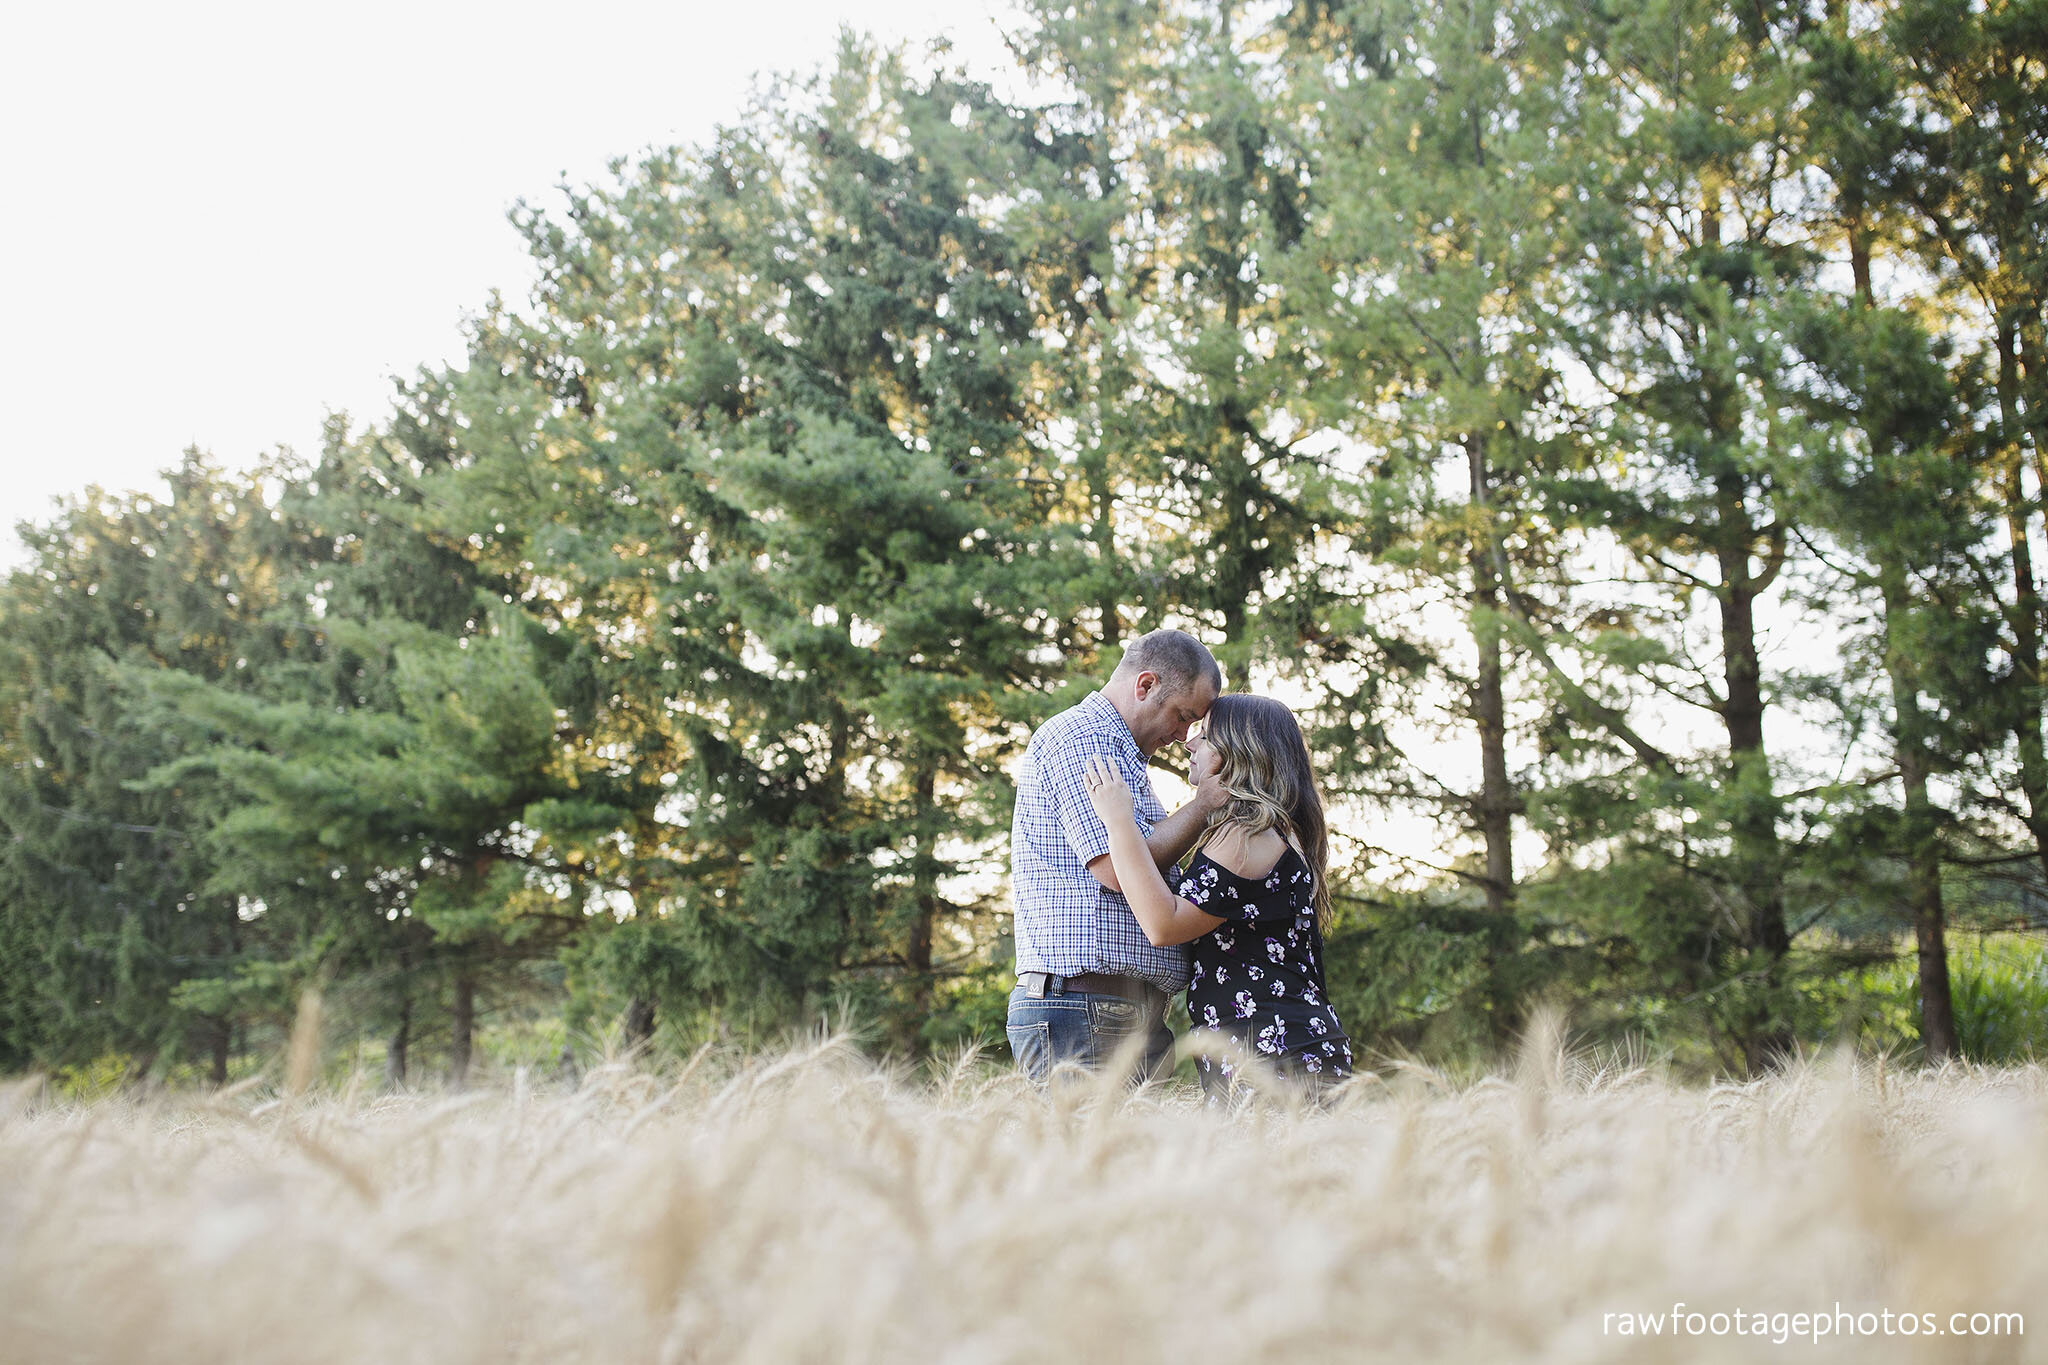 london_ontario_wedding_photographer-engagement_session-farm_engagement-country_e_session-raw_footage_photography-corn_field-013.jpg